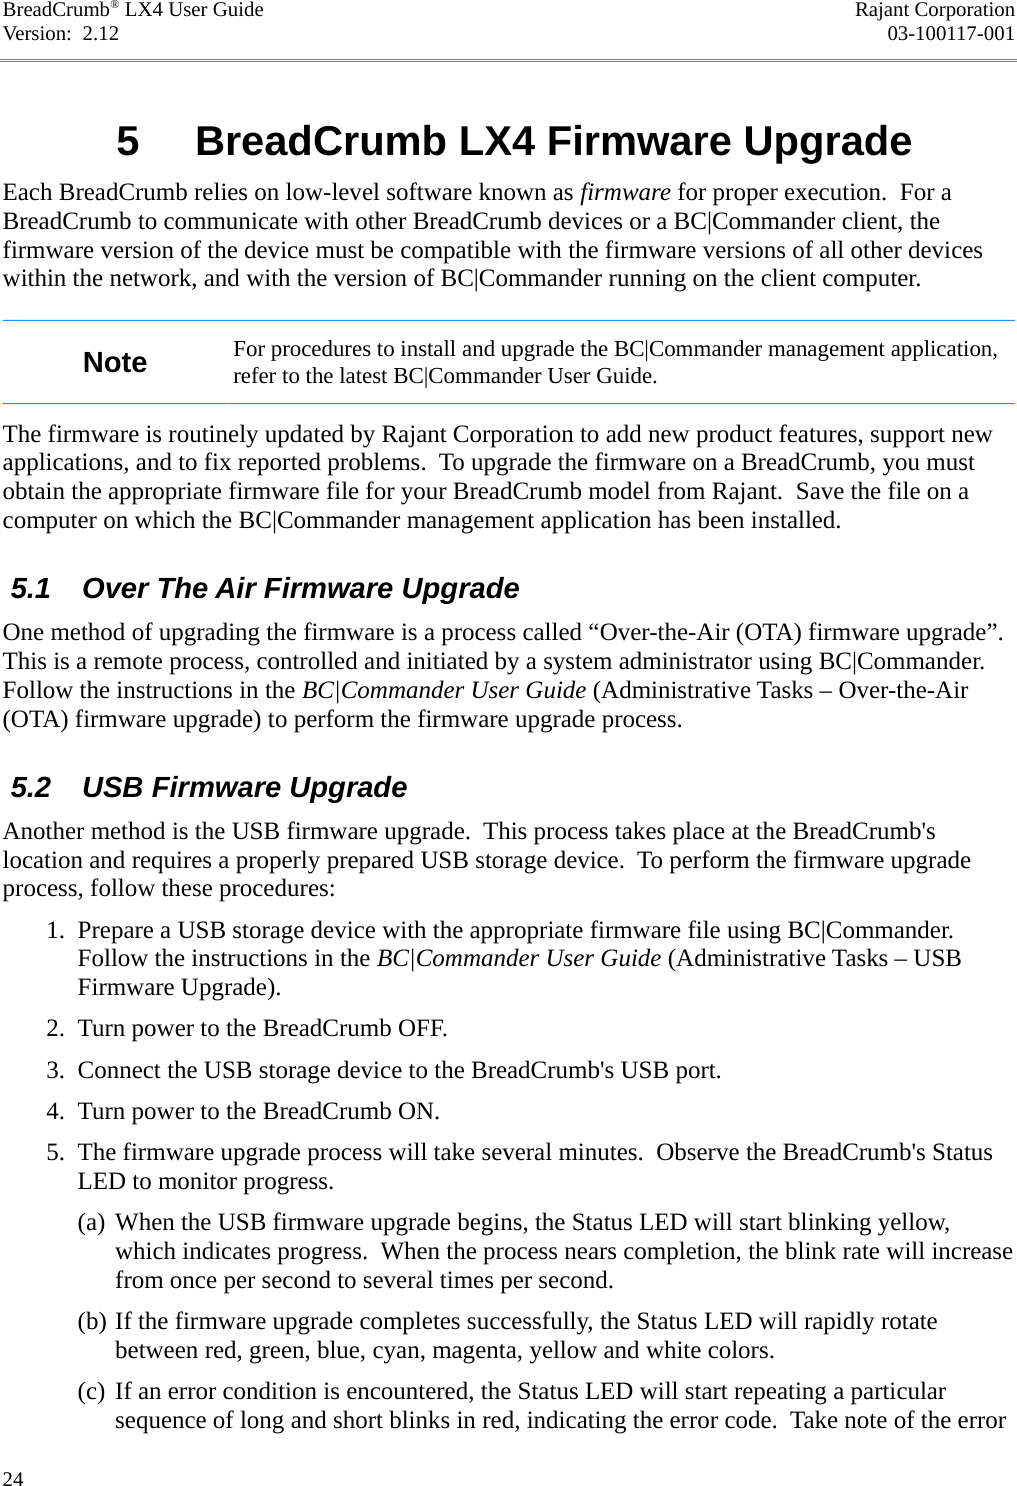 BreadCrumb® LX4 User Guide Rajant CorporationVersion:  2.12 03-100117-001 5  BreadCrumb LX4 Firmware UpgradeEach BreadCrumb relies on low-level software known as firmware for proper execution.  For a BreadCrumb to communicate with other BreadCrumb devices or a BC|Commander client, the firmware version of the device must be compatible with the firmware versions of all other devices within the network, and with the version of BC|Commander running on the client computer.Note For procedures to install and upgrade the BC|Commander management application, refer to the latest BC|Commander User Guide.The firmware is routinely updated by Rajant Corporation to add new product features, support new applications, and to fix reported problems.  To upgrade the firmware on a BreadCrumb, you must obtain the appropriate firmware file for your BreadCrumb model from Rajant.  Save the file on a computer on which the BC|Commander management application has been installed. 5.1  Over The Air Firmware UpgradeOne method of upgrading the firmware is a process called “Over-the-Air (OTA) firmware upgrade”. This is a remote process, controlled and initiated by a system administrator using BC|Commander. Follow the instructions in the BC|Commander User Guide (Administrative Tasks – Over-the-Air (OTA) firmware upgrade) to perform the firmware upgrade process. 5.2  USB Firmware UpgradeAnother method is the USB firmware upgrade.  This process takes place at the BreadCrumb&apos;s location and requires a properly prepared USB storage device.  To perform the firmware upgrade process, follow these procedures: 1. Prepare a USB storage device with the appropriate firmware file using BC|Commander. Follow the instructions in the BC|Commander User Guide (Administrative Tasks – USB Firmware Upgrade). 2. Turn power to the BreadCrumb OFF. 3. Connect the USB storage device to the BreadCrumb&apos;s USB port. 4. Turn power to the BreadCrumb ON. 5. The firmware upgrade process will take several minutes.  Observe the BreadCrumb&apos;s Status LED to monitor progress.(a) When the USB firmware upgrade begins, the Status LED will start blinking yellow, which indicates progress.  When the process nears completion, the blink rate will increase from once per second to several times per second.(b) If the firmware upgrade completes successfully, the Status LED will rapidly rotate between red, green, blue, cyan, magenta, yellow and white colors.(c) If an error condition is encountered, the Status LED will start repeating a particular sequence of long and short blinks in red, indicating the error code.  Take note of the error 24